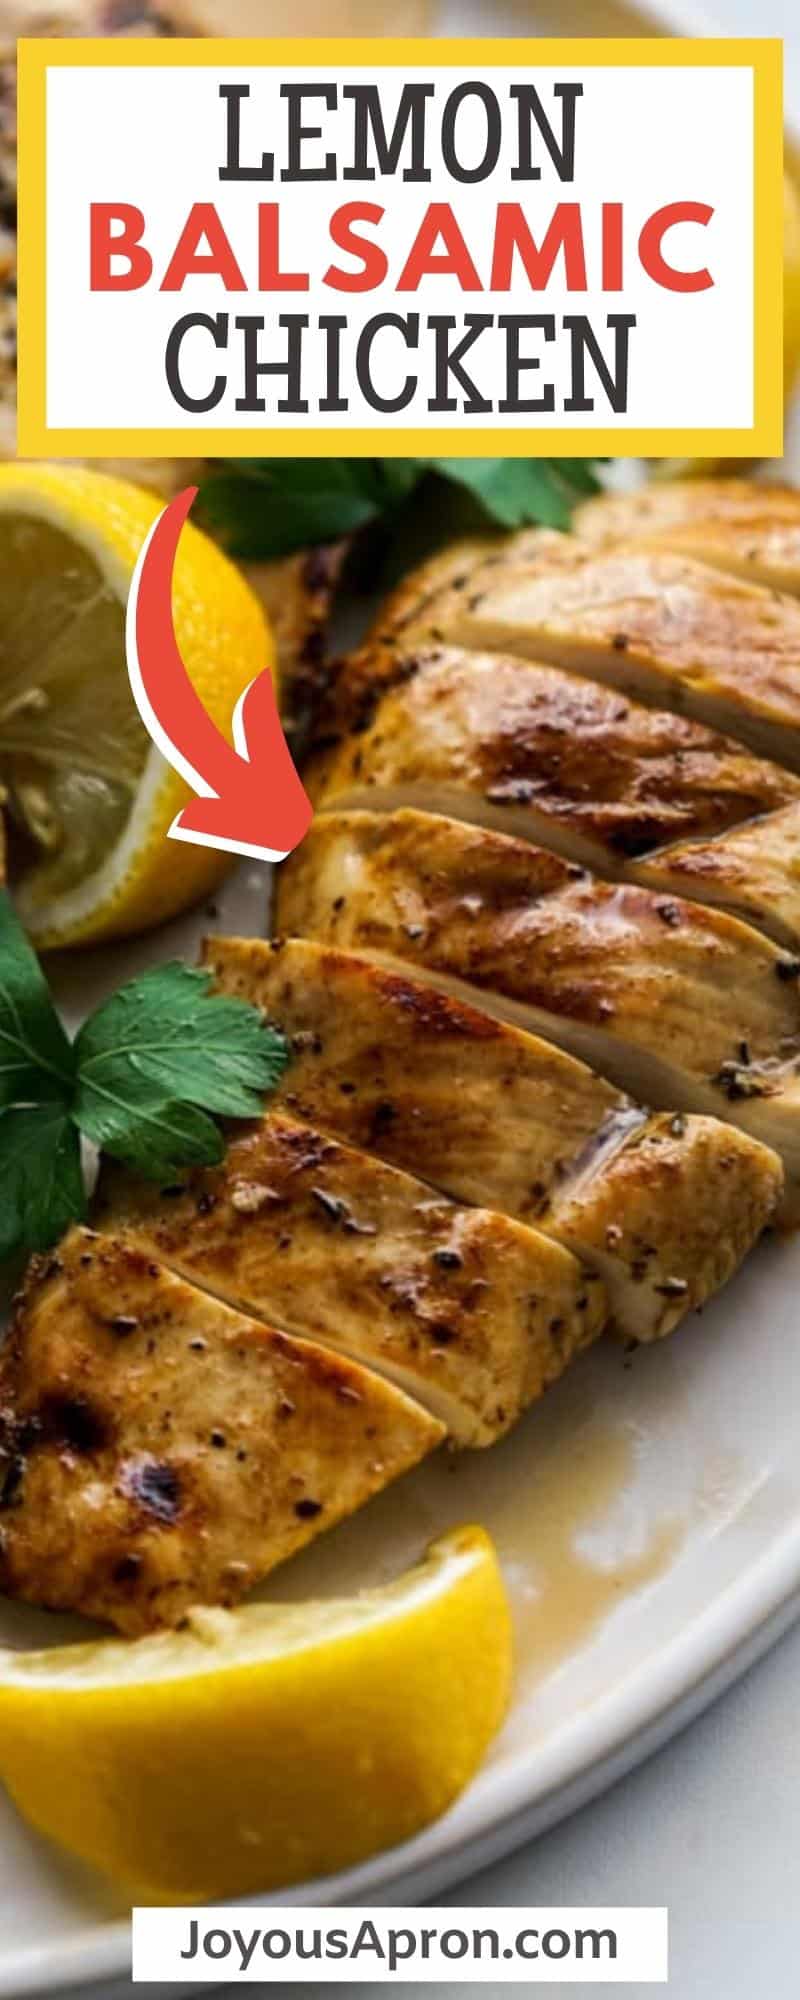 Lemon Balsamic Chicken - Easy grilled chicken breast recipe marinated in lots of citrus flavor, herbs and spices. Great for summer cookouts and dinners. via @joyousapron